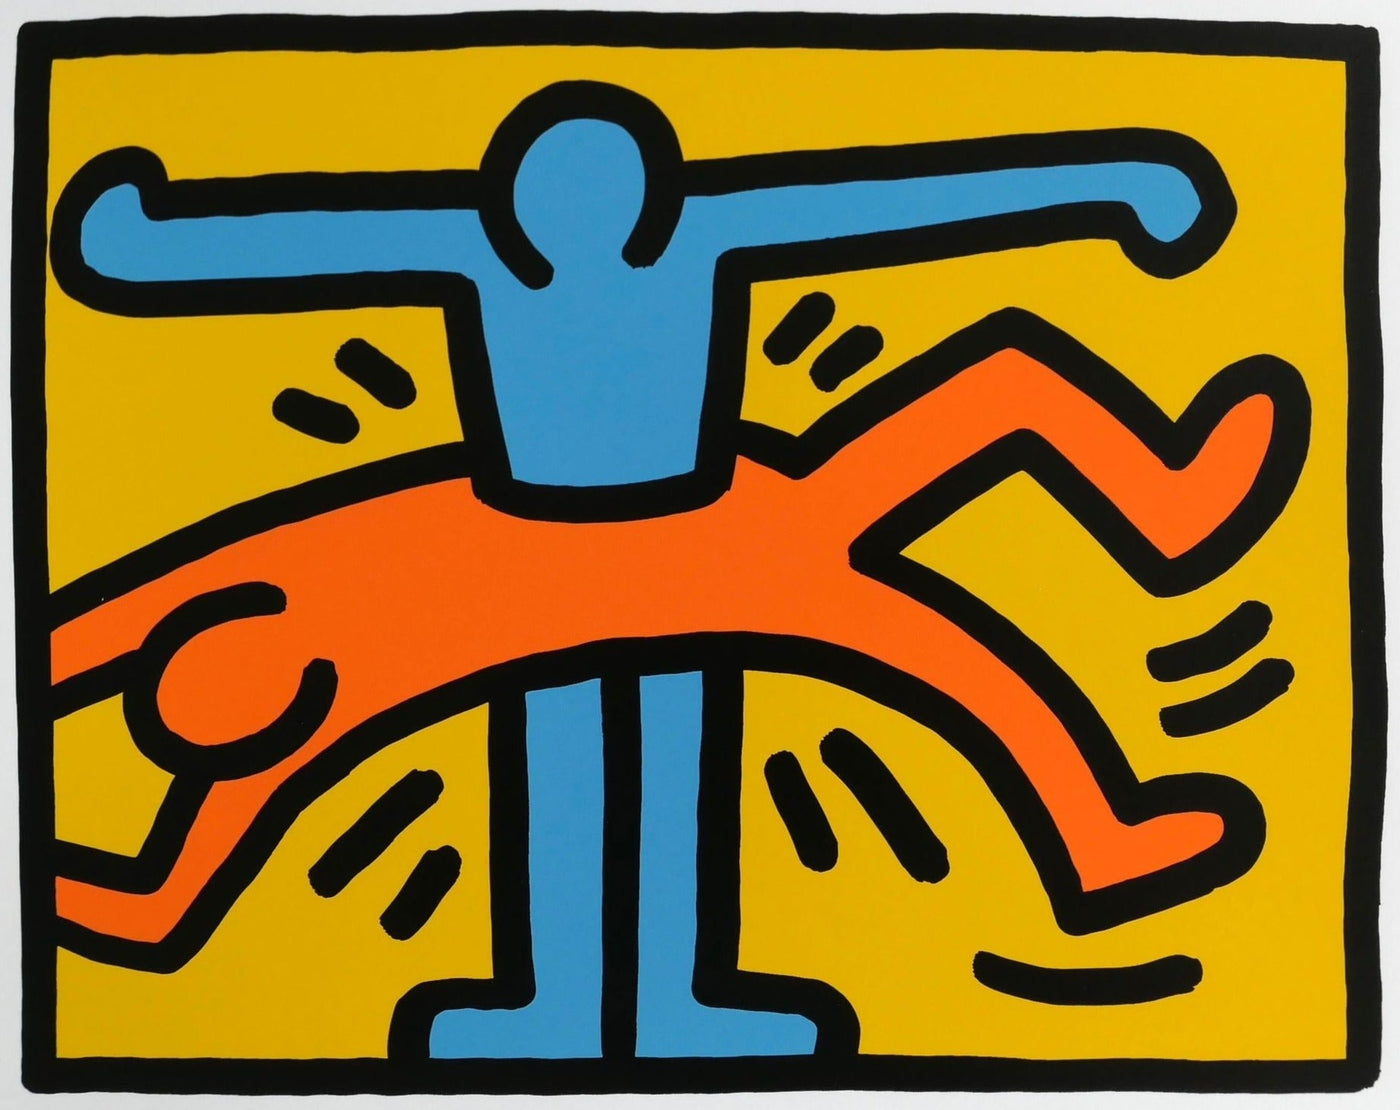 Keith Haring Pop Shop VI Plate 1 (L. PP. 150-51) 1989